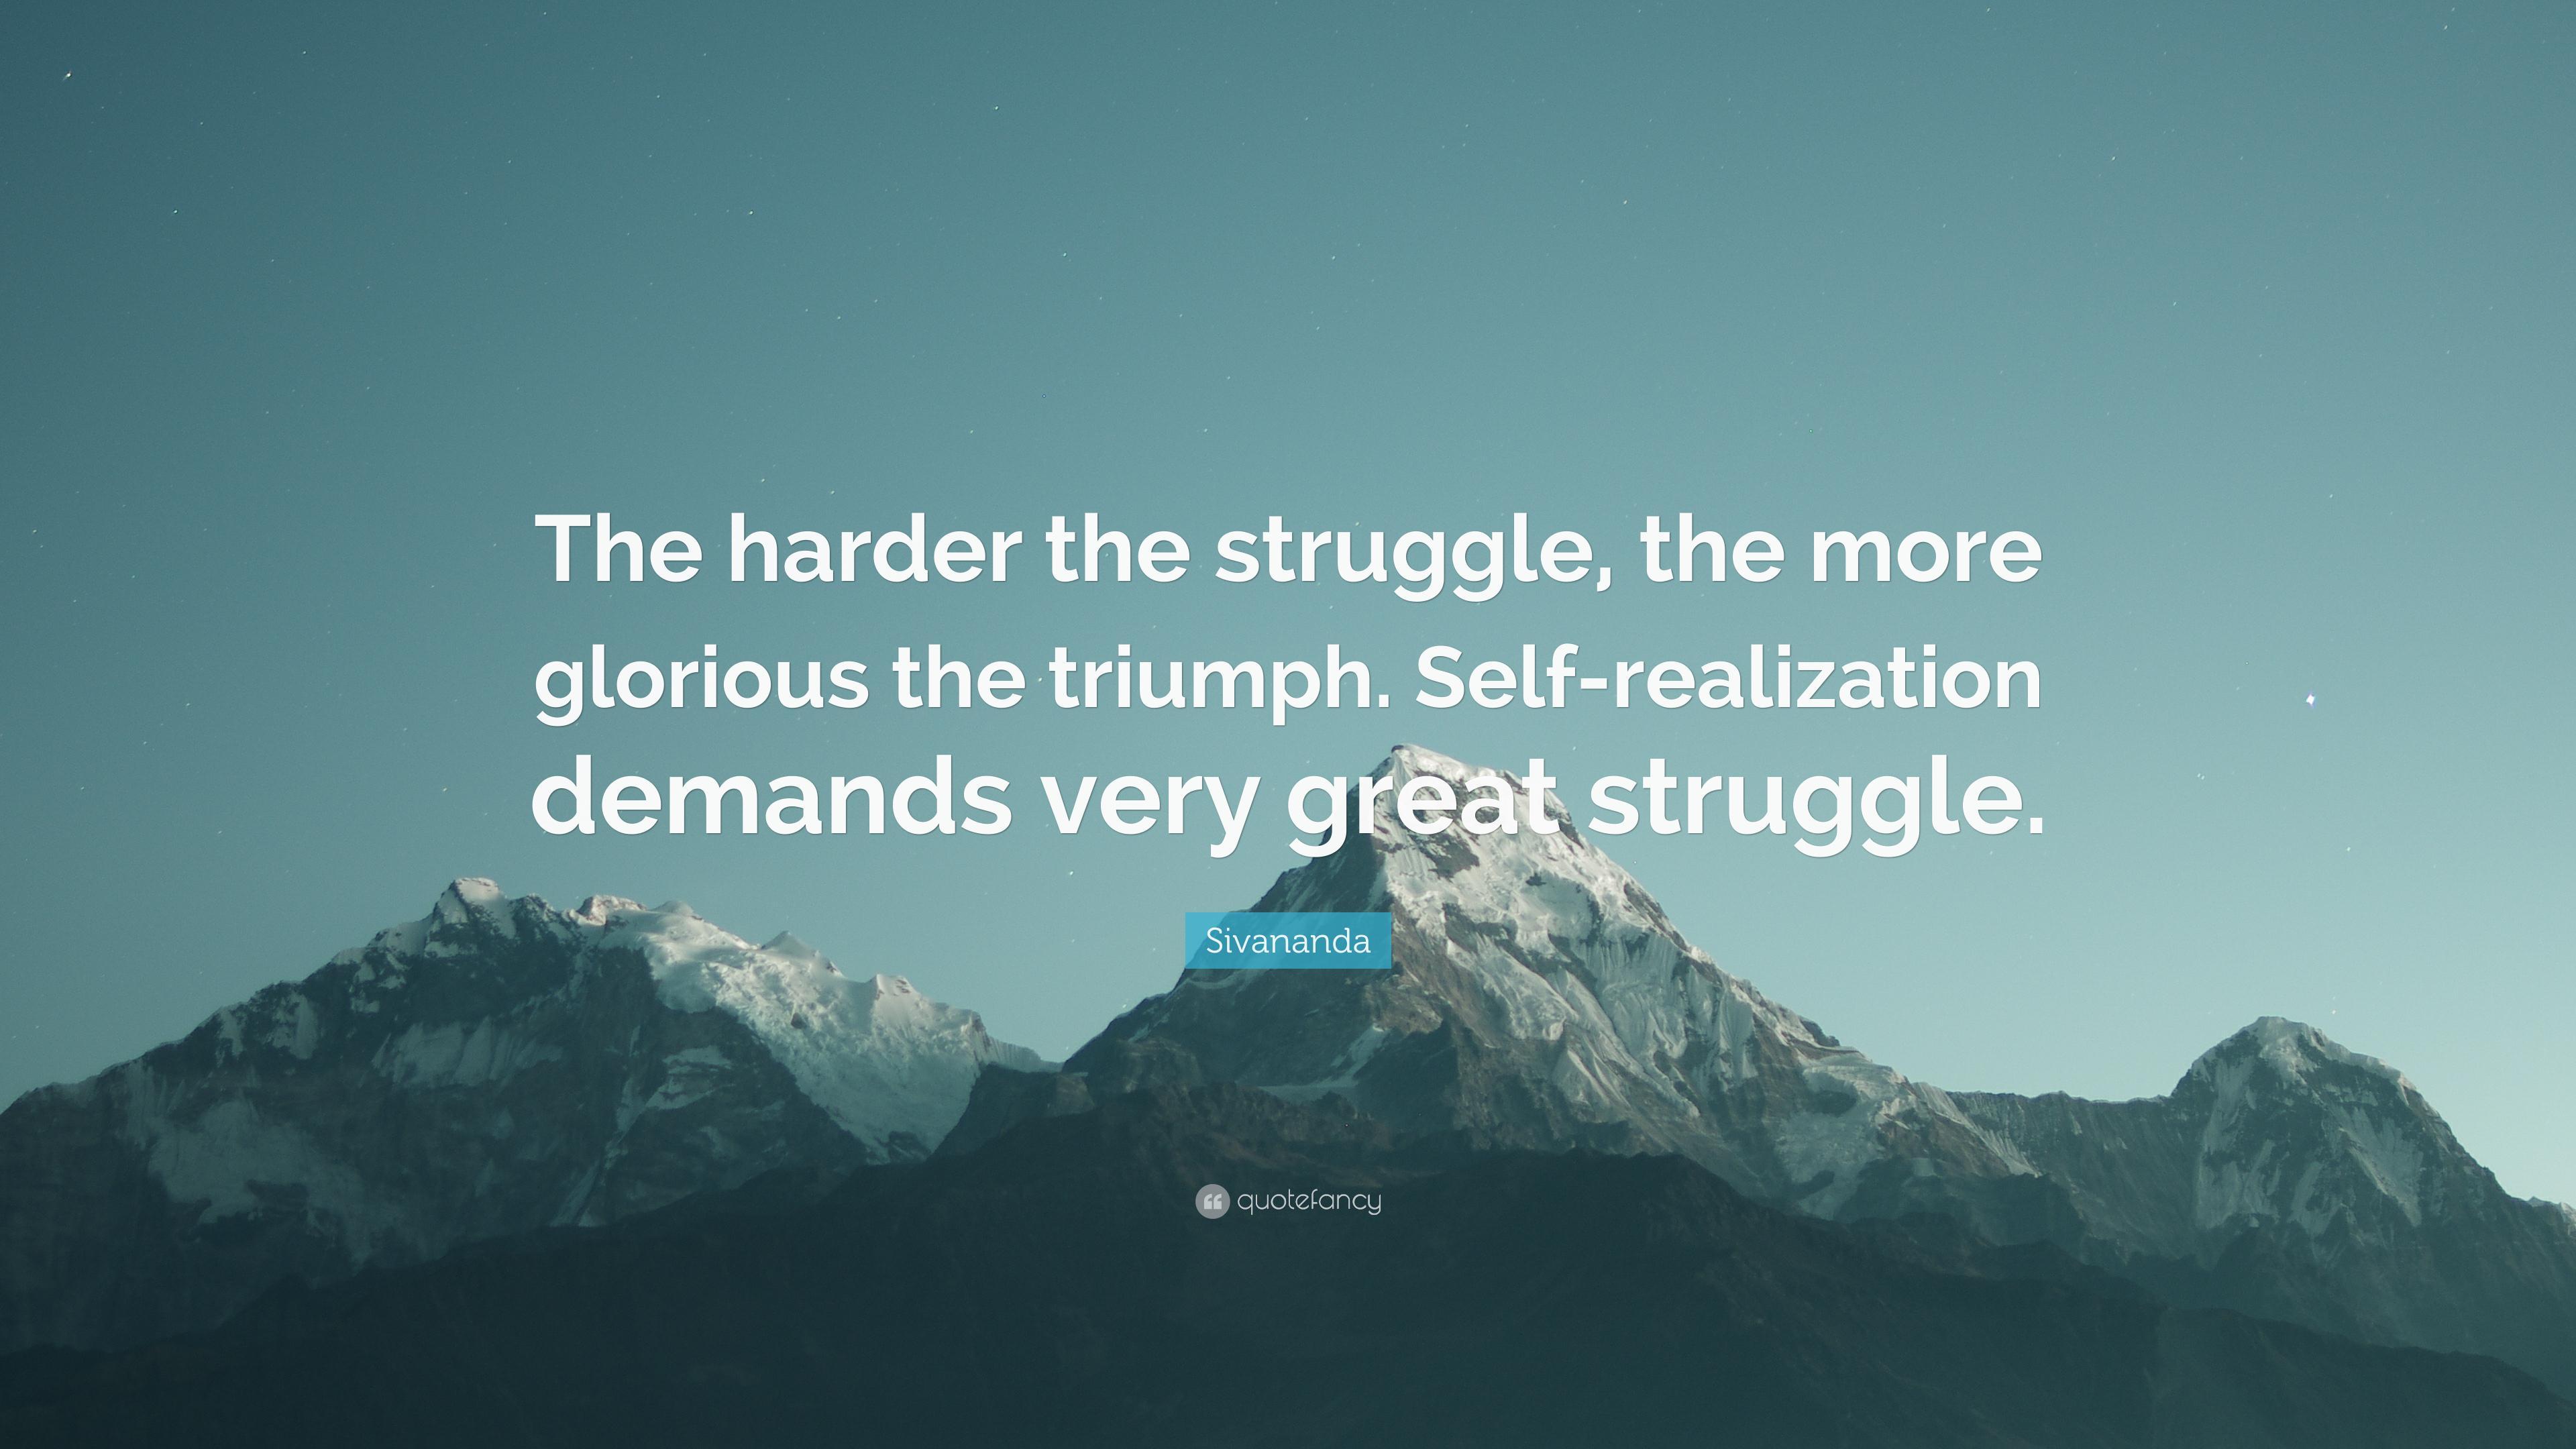 Sivananda Quote: “The harder the struggle, the more glorious